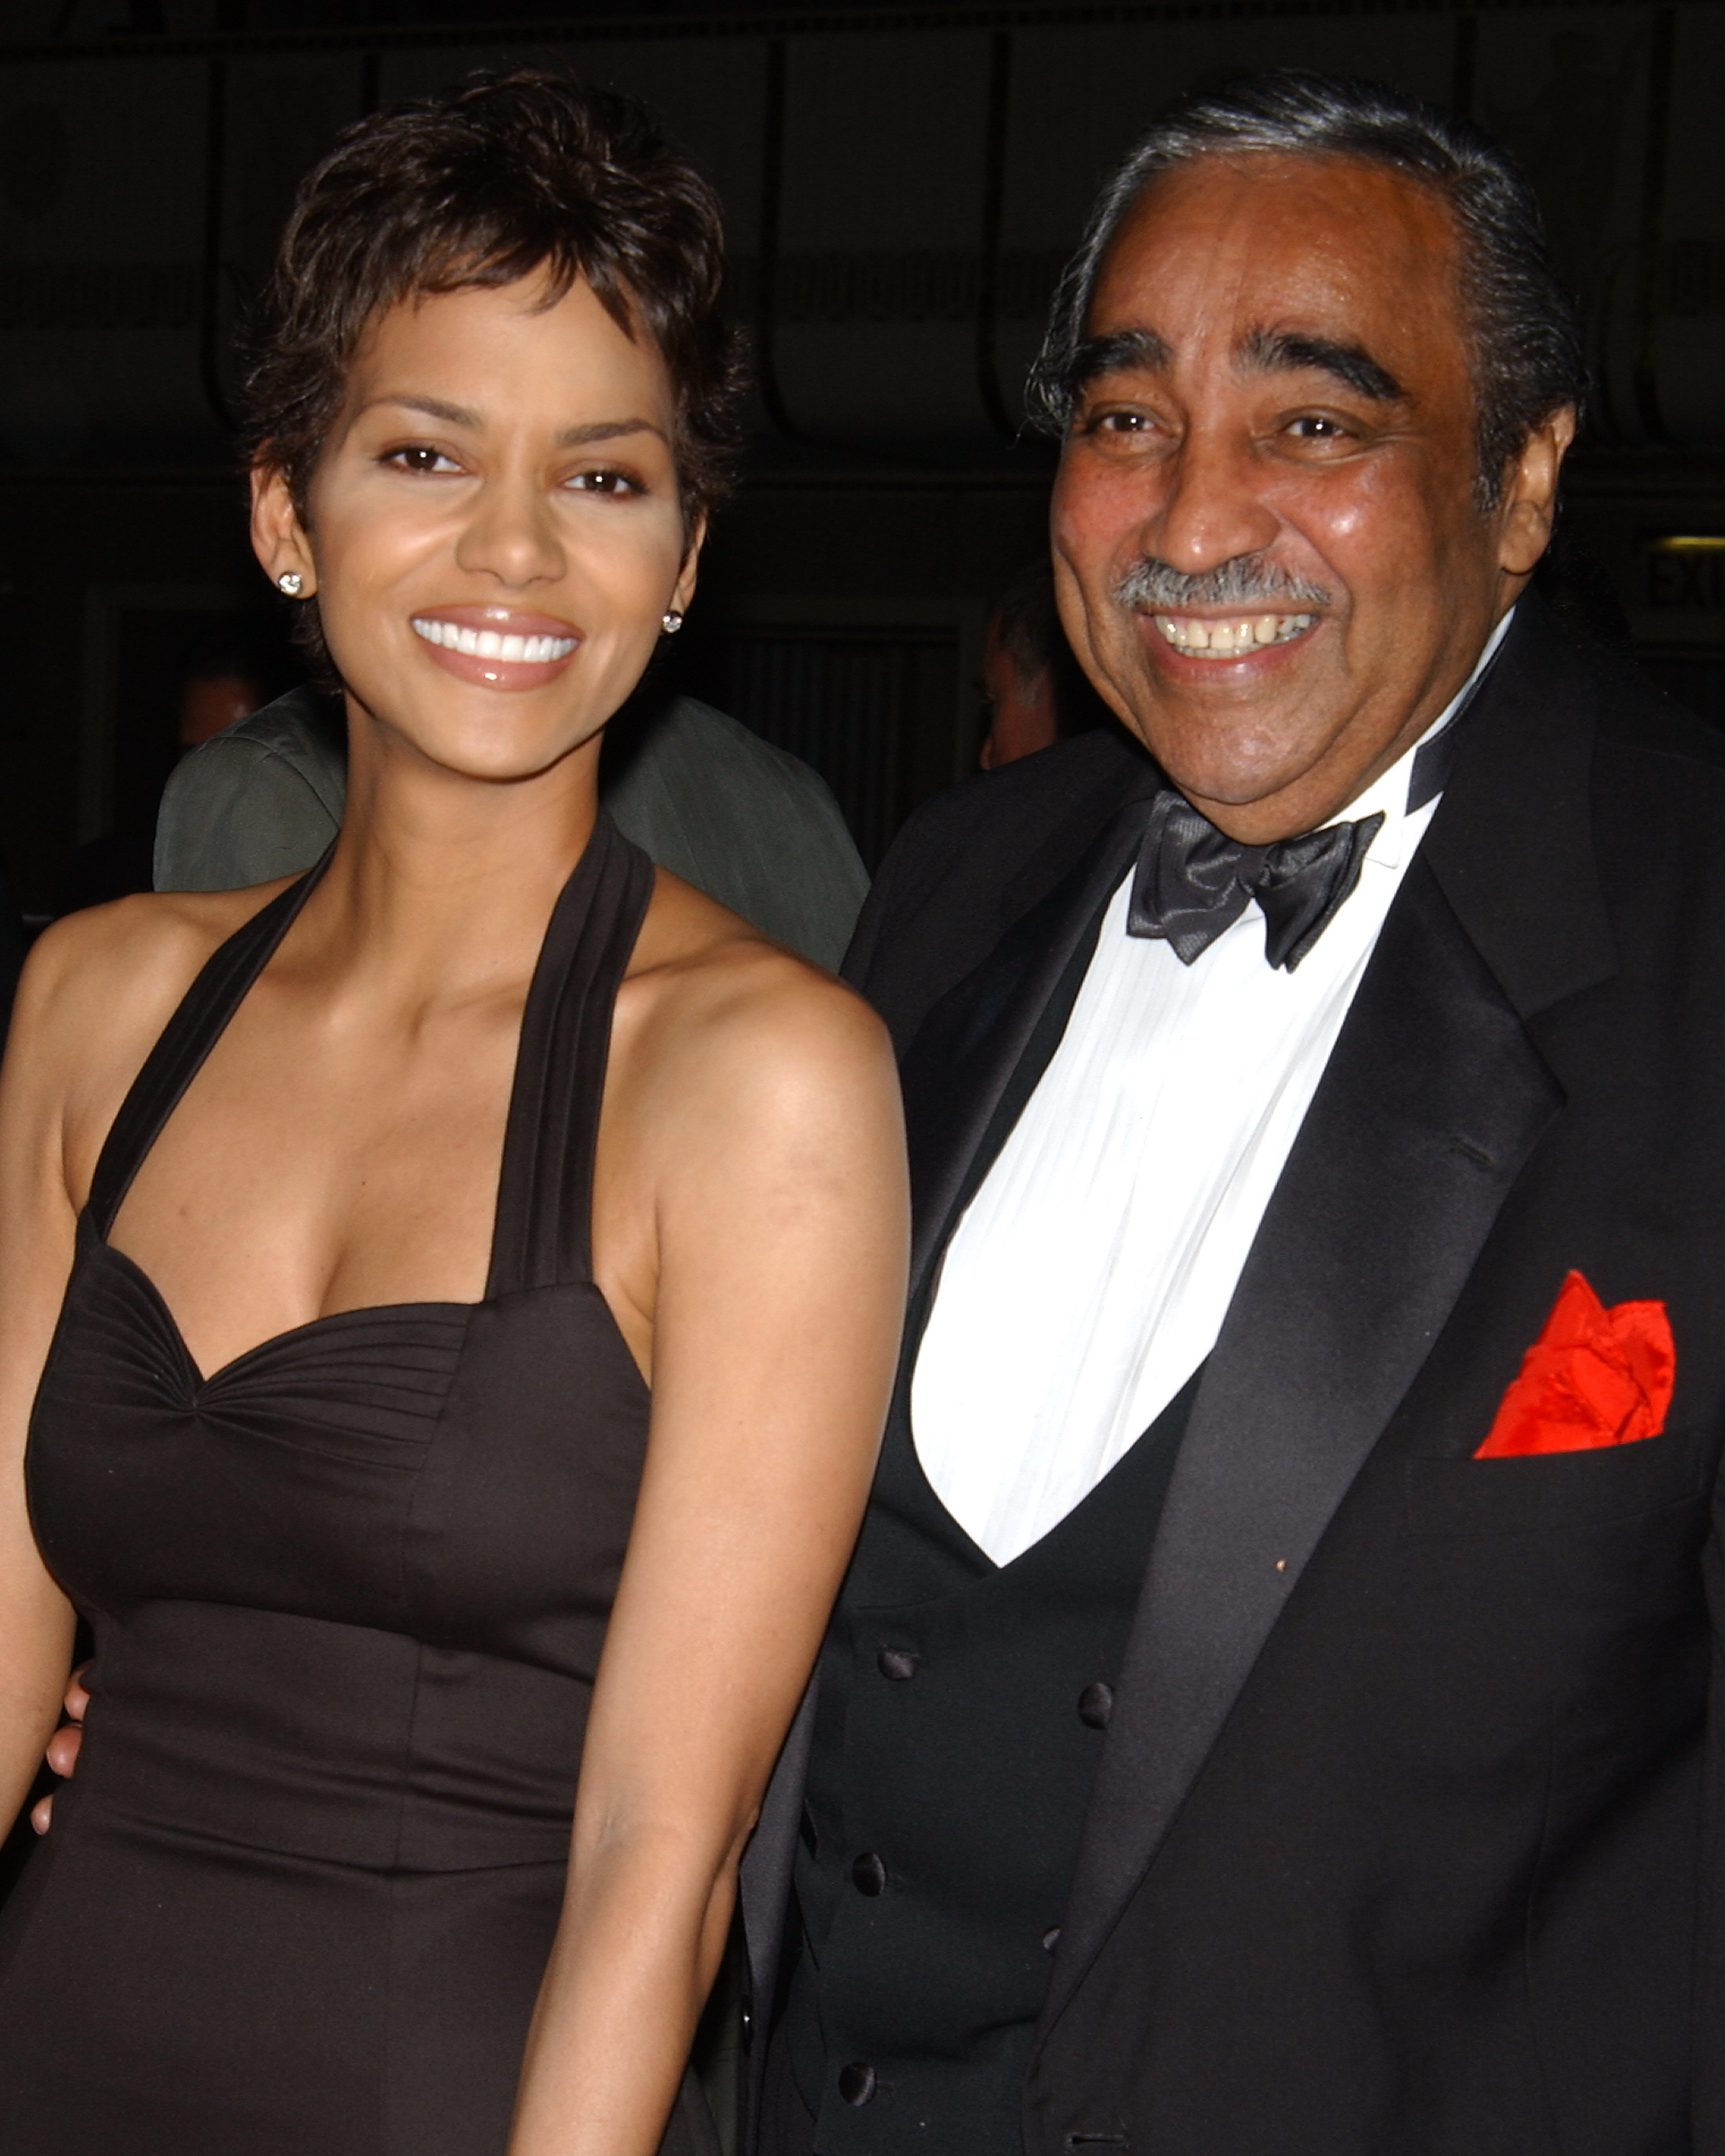 Halle Berry and Congressman Charles Rangel at the Directors